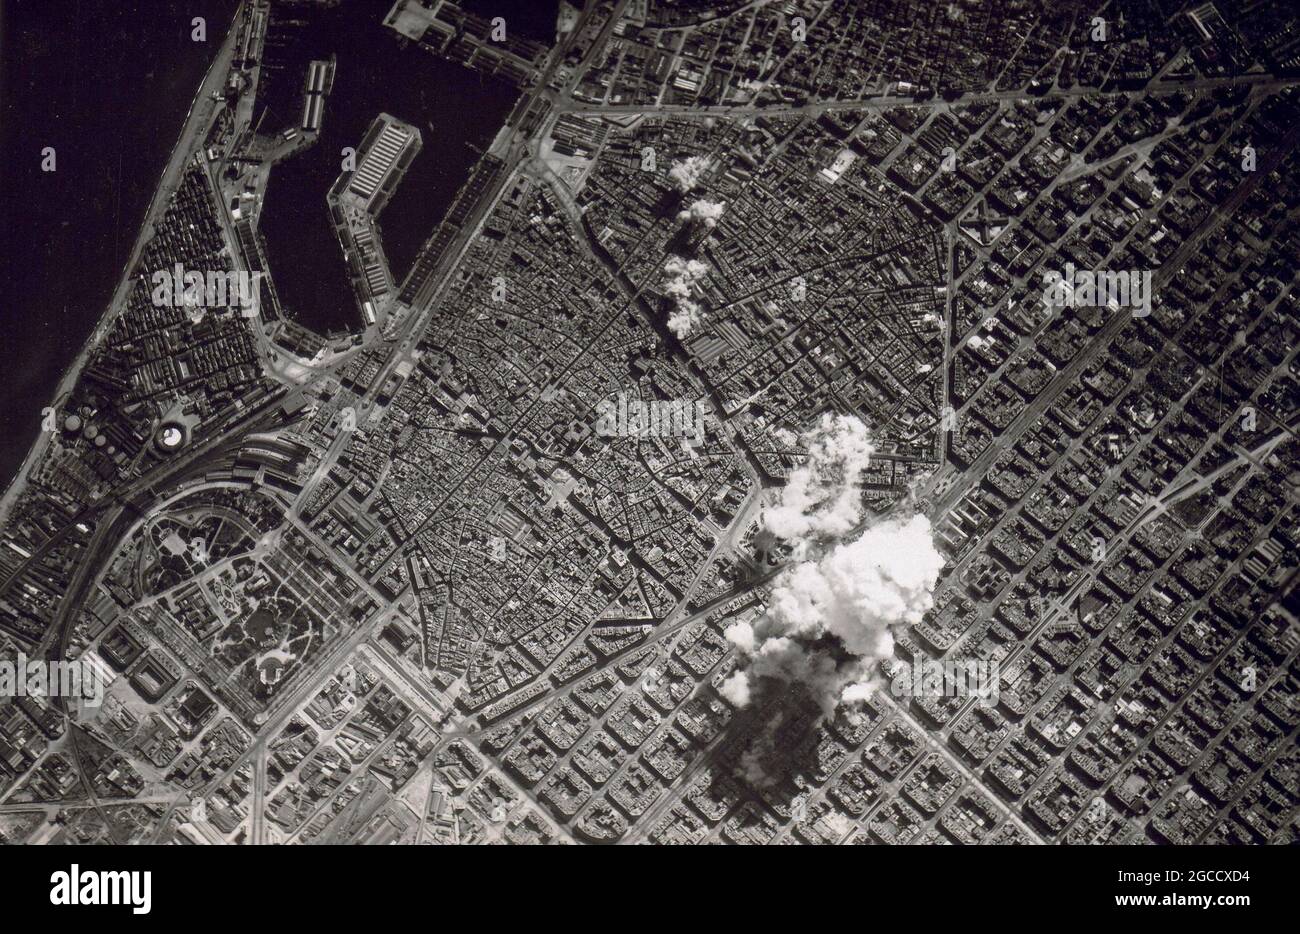 BARCELONA, CATALONIA, SPAIN - 17 March 1938 - Aerial view of the bombing of Barcelona by the Italian air force during the Spanish Civil War - Photo: G Stock Photo